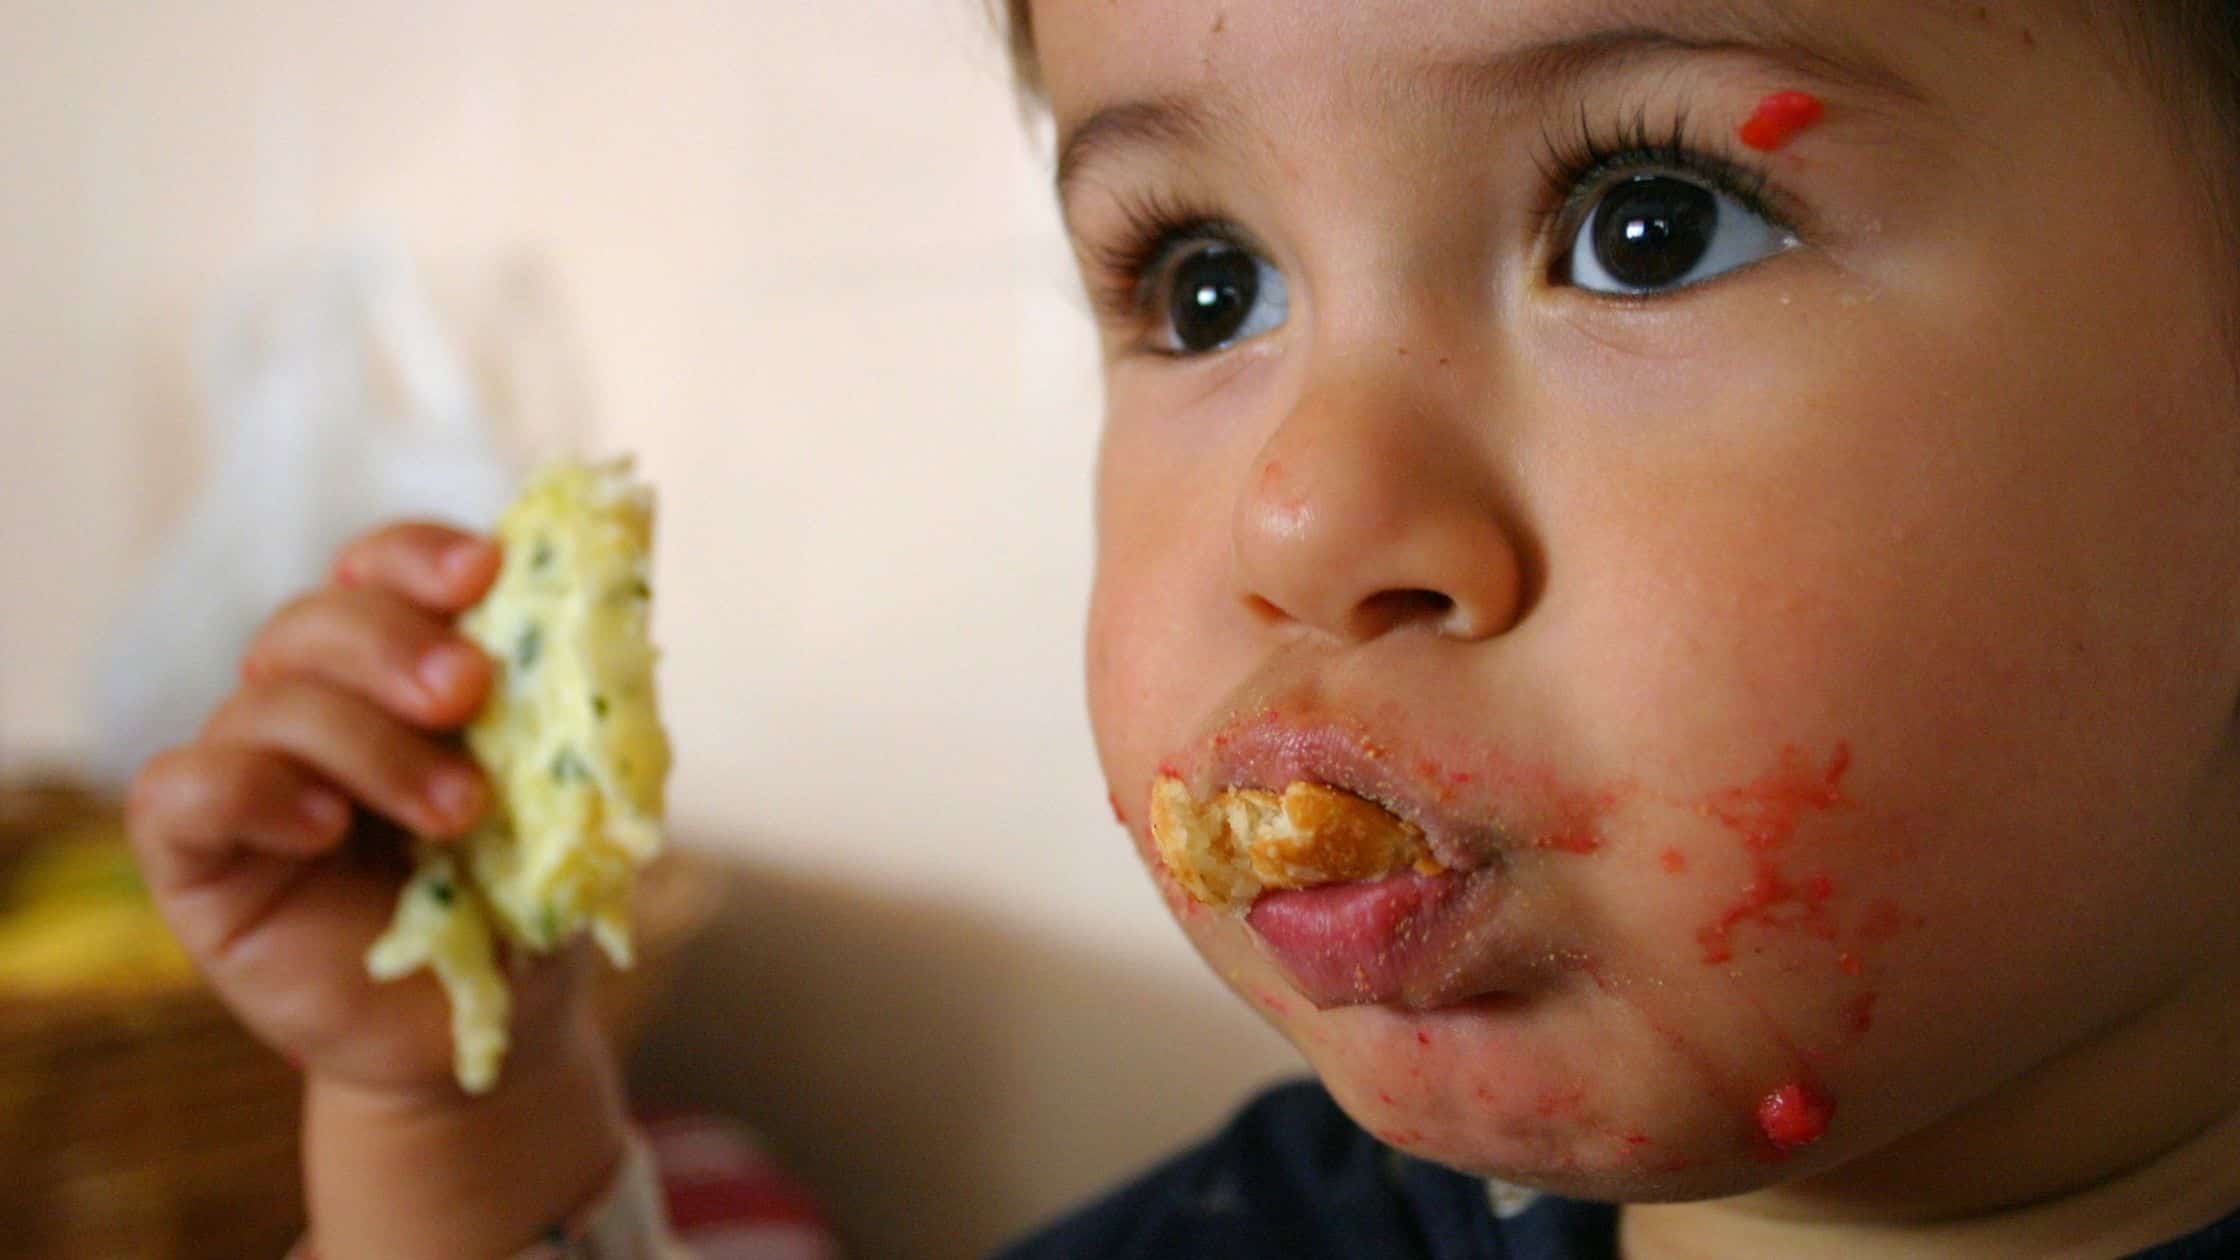 child stuffing too much food in their mouth